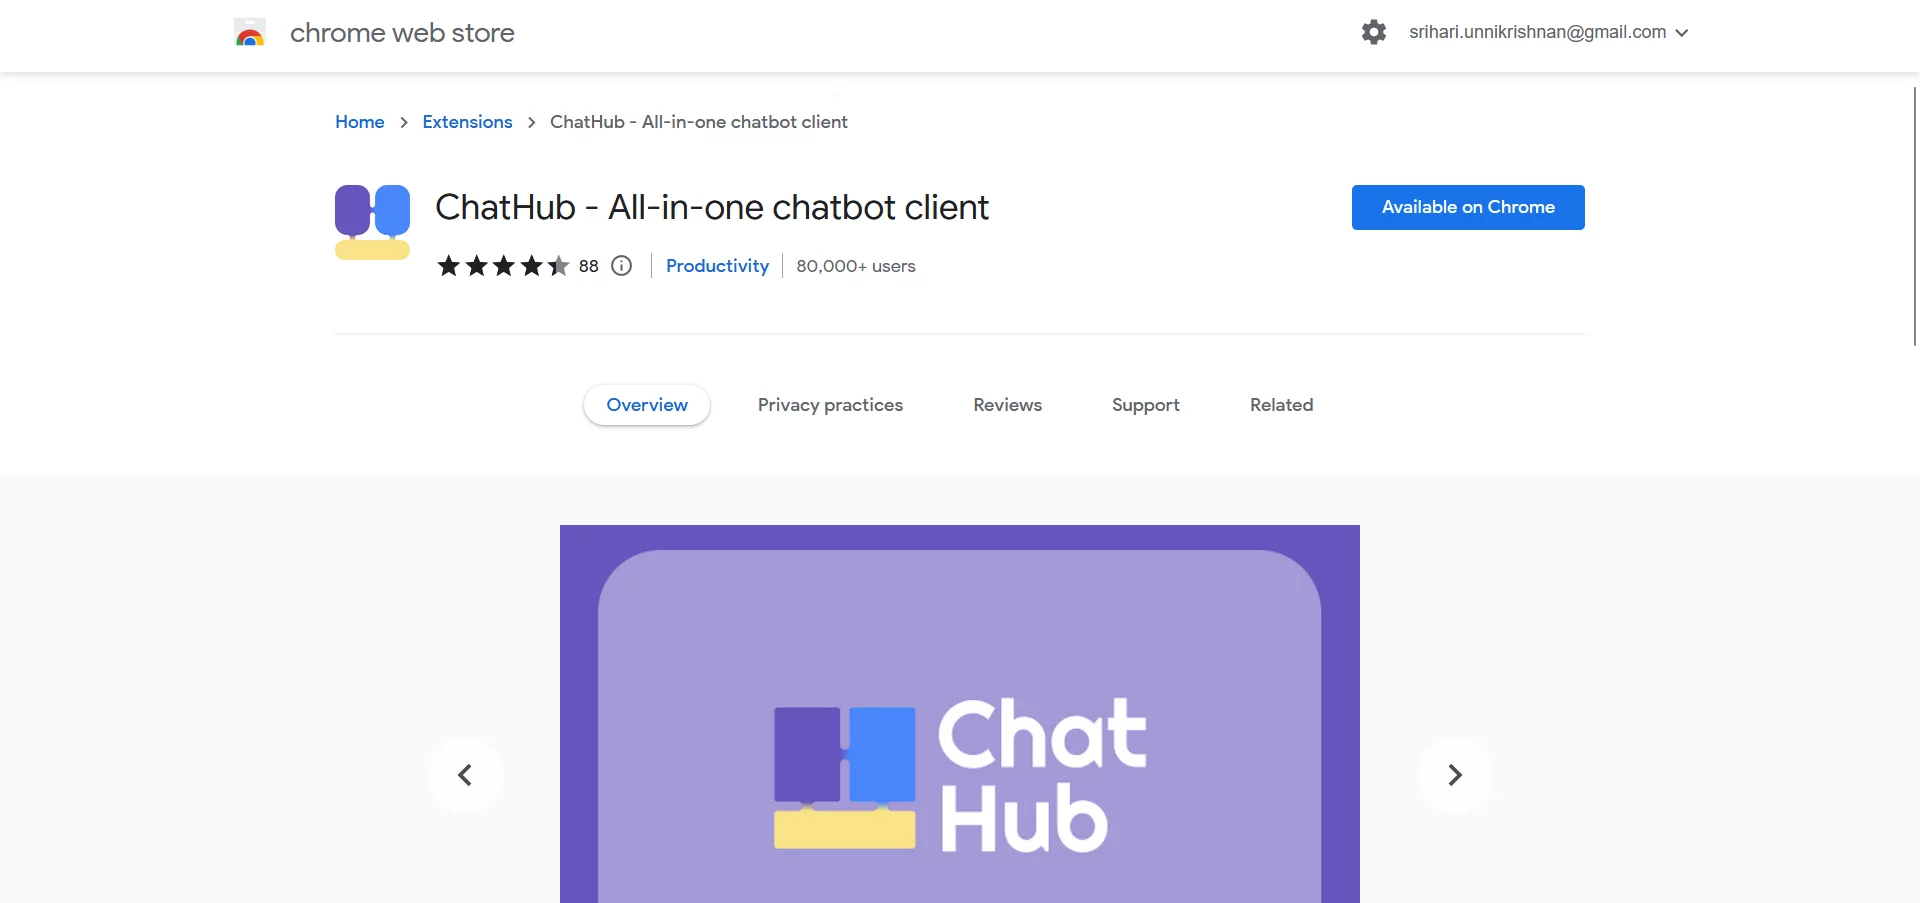  All-in-one chatbot client.